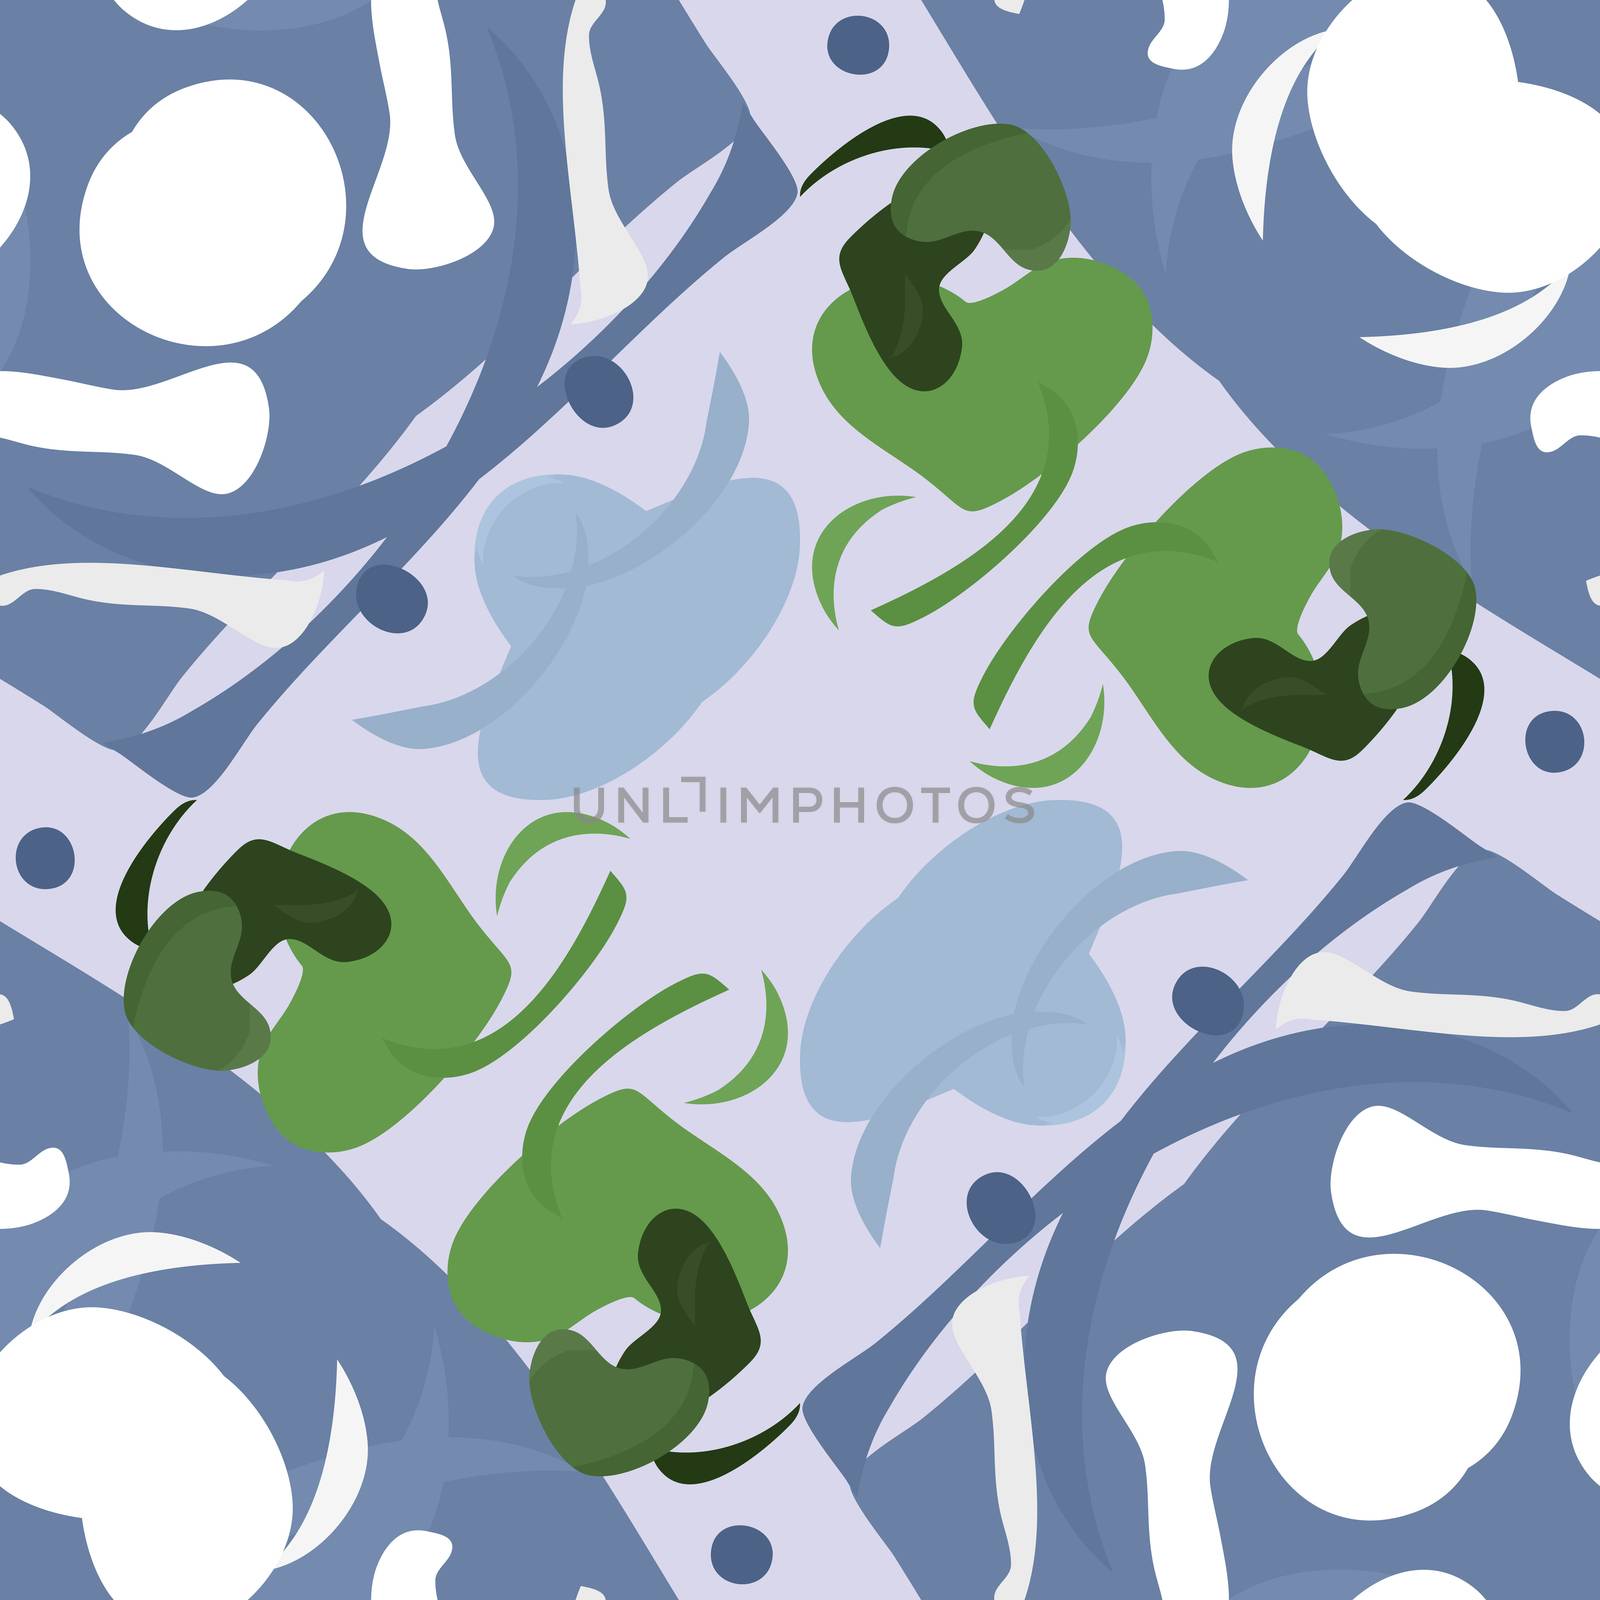 Seamless background pattern of blue and green shapes